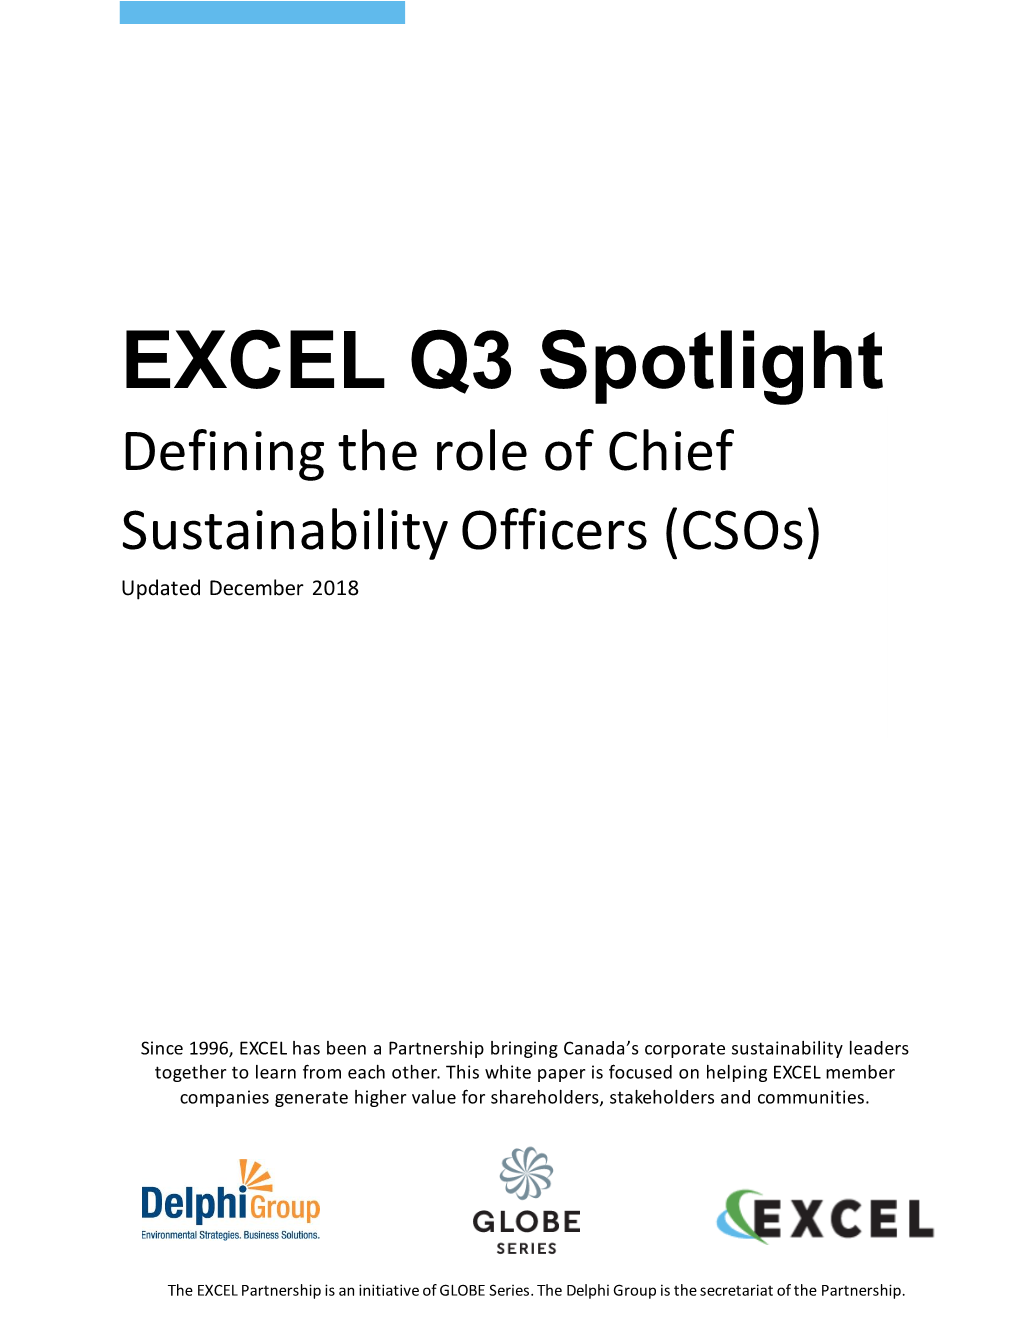 EXCEL Q3 Spotlight Defining the Role of Chief Sustainability Officers (Csos) Updated December 2018